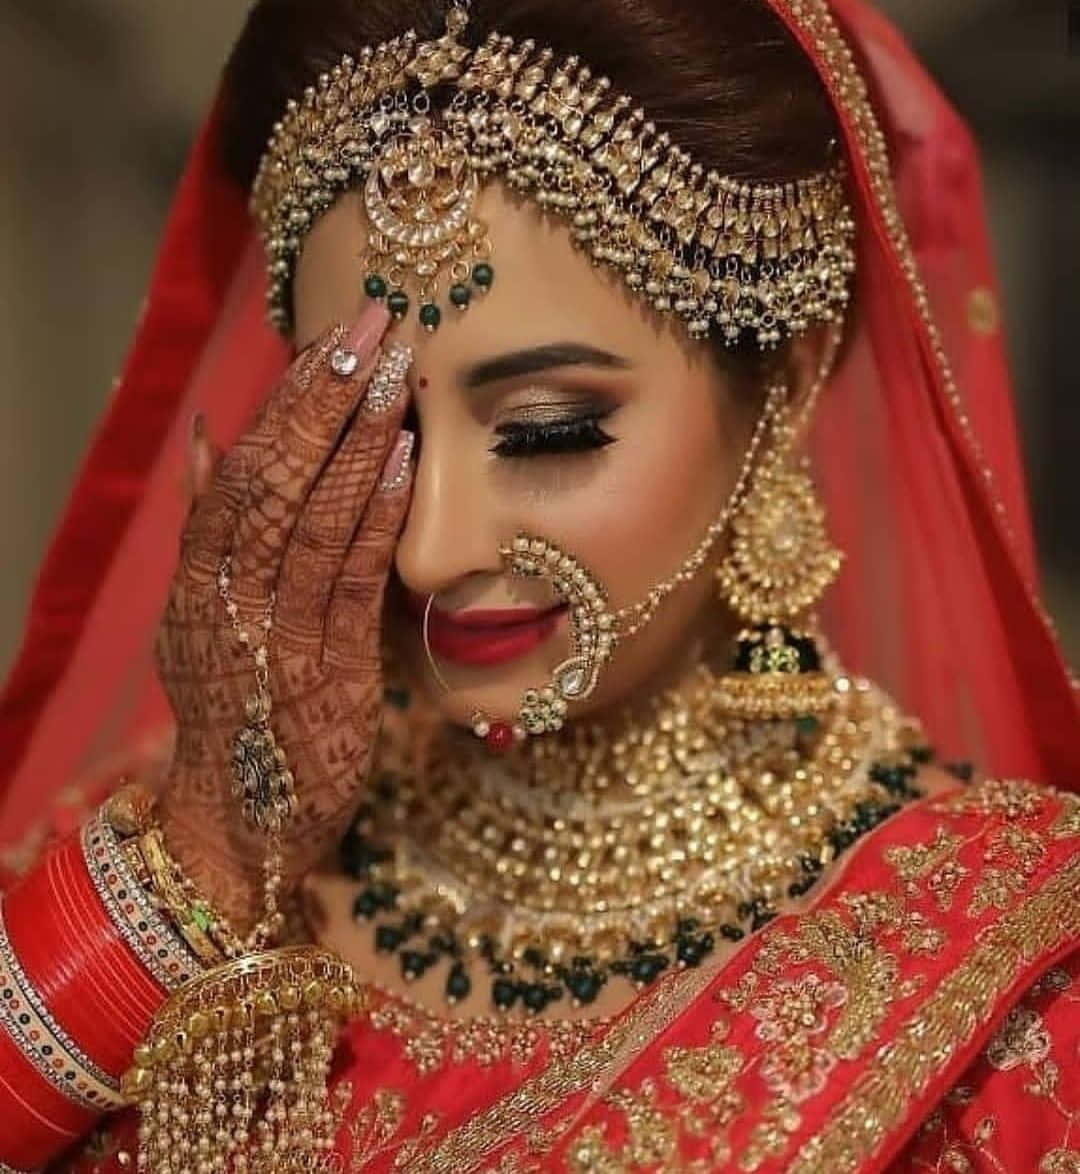 A Bride In Red And Gold Jewelry